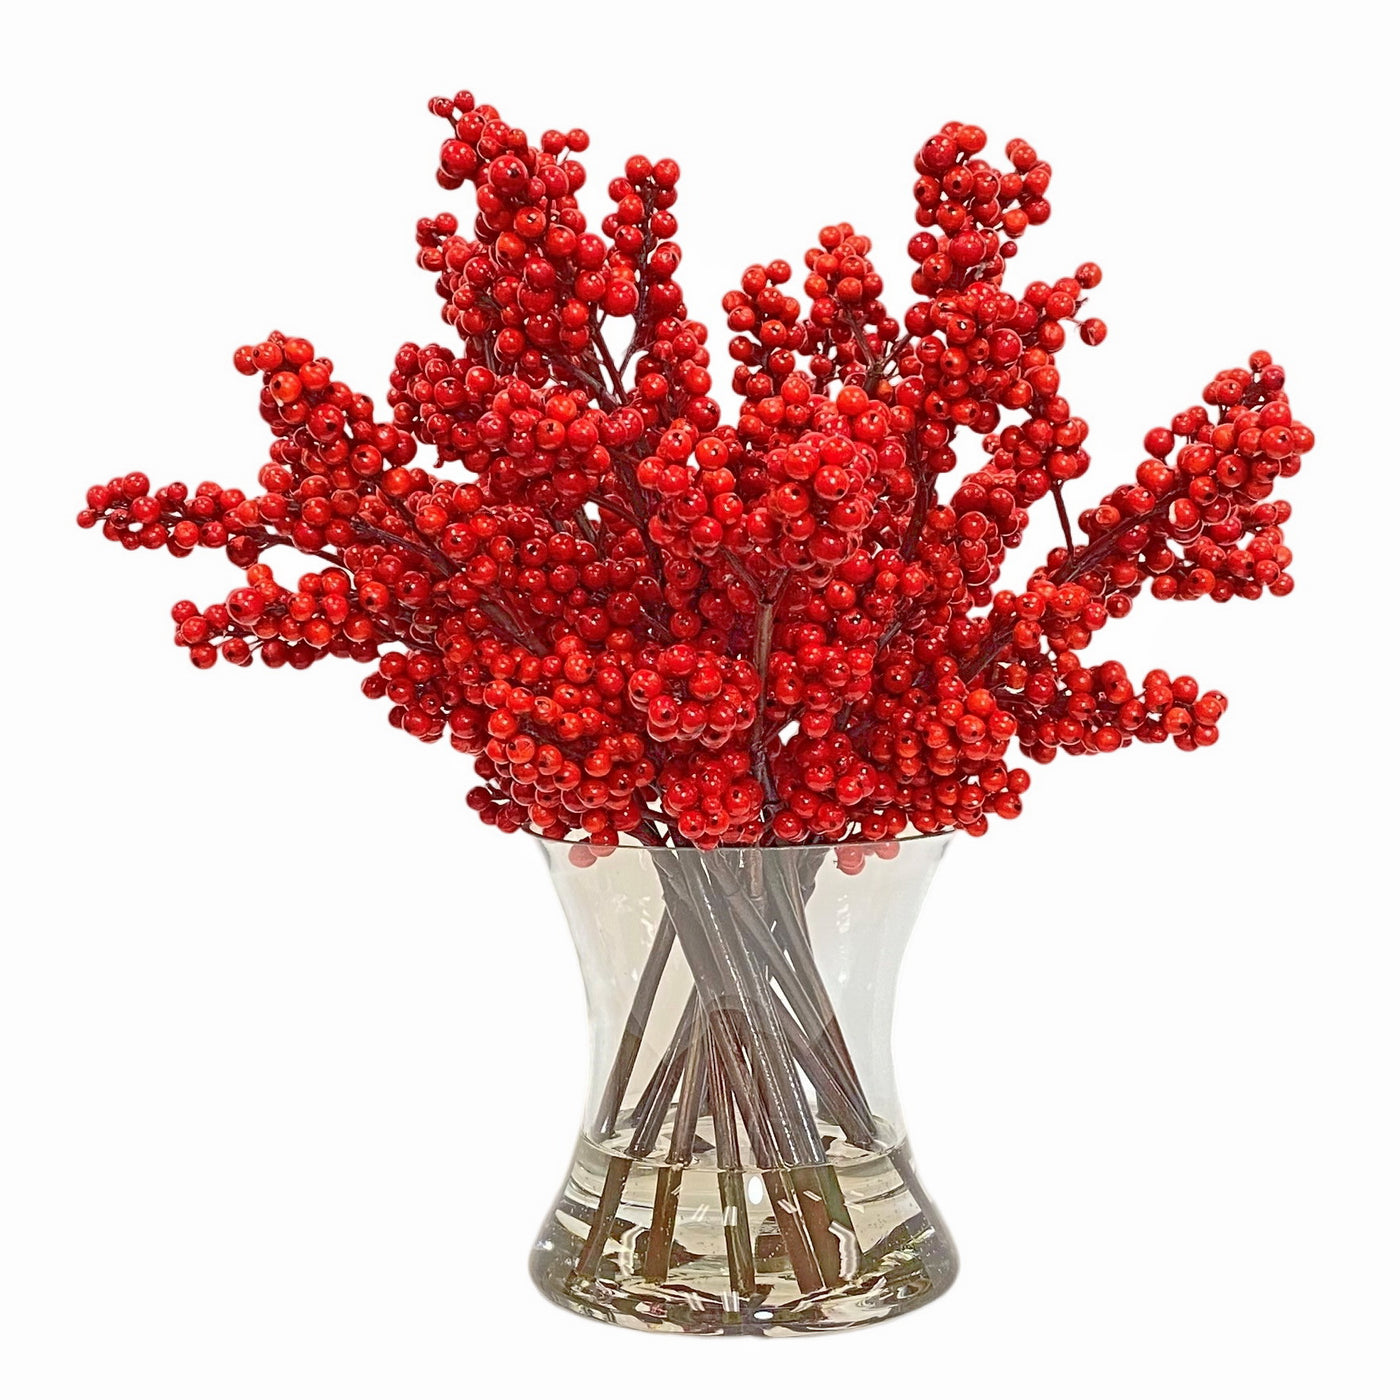 Red faux berries arrangement in glass vase holiday centerpiece decor